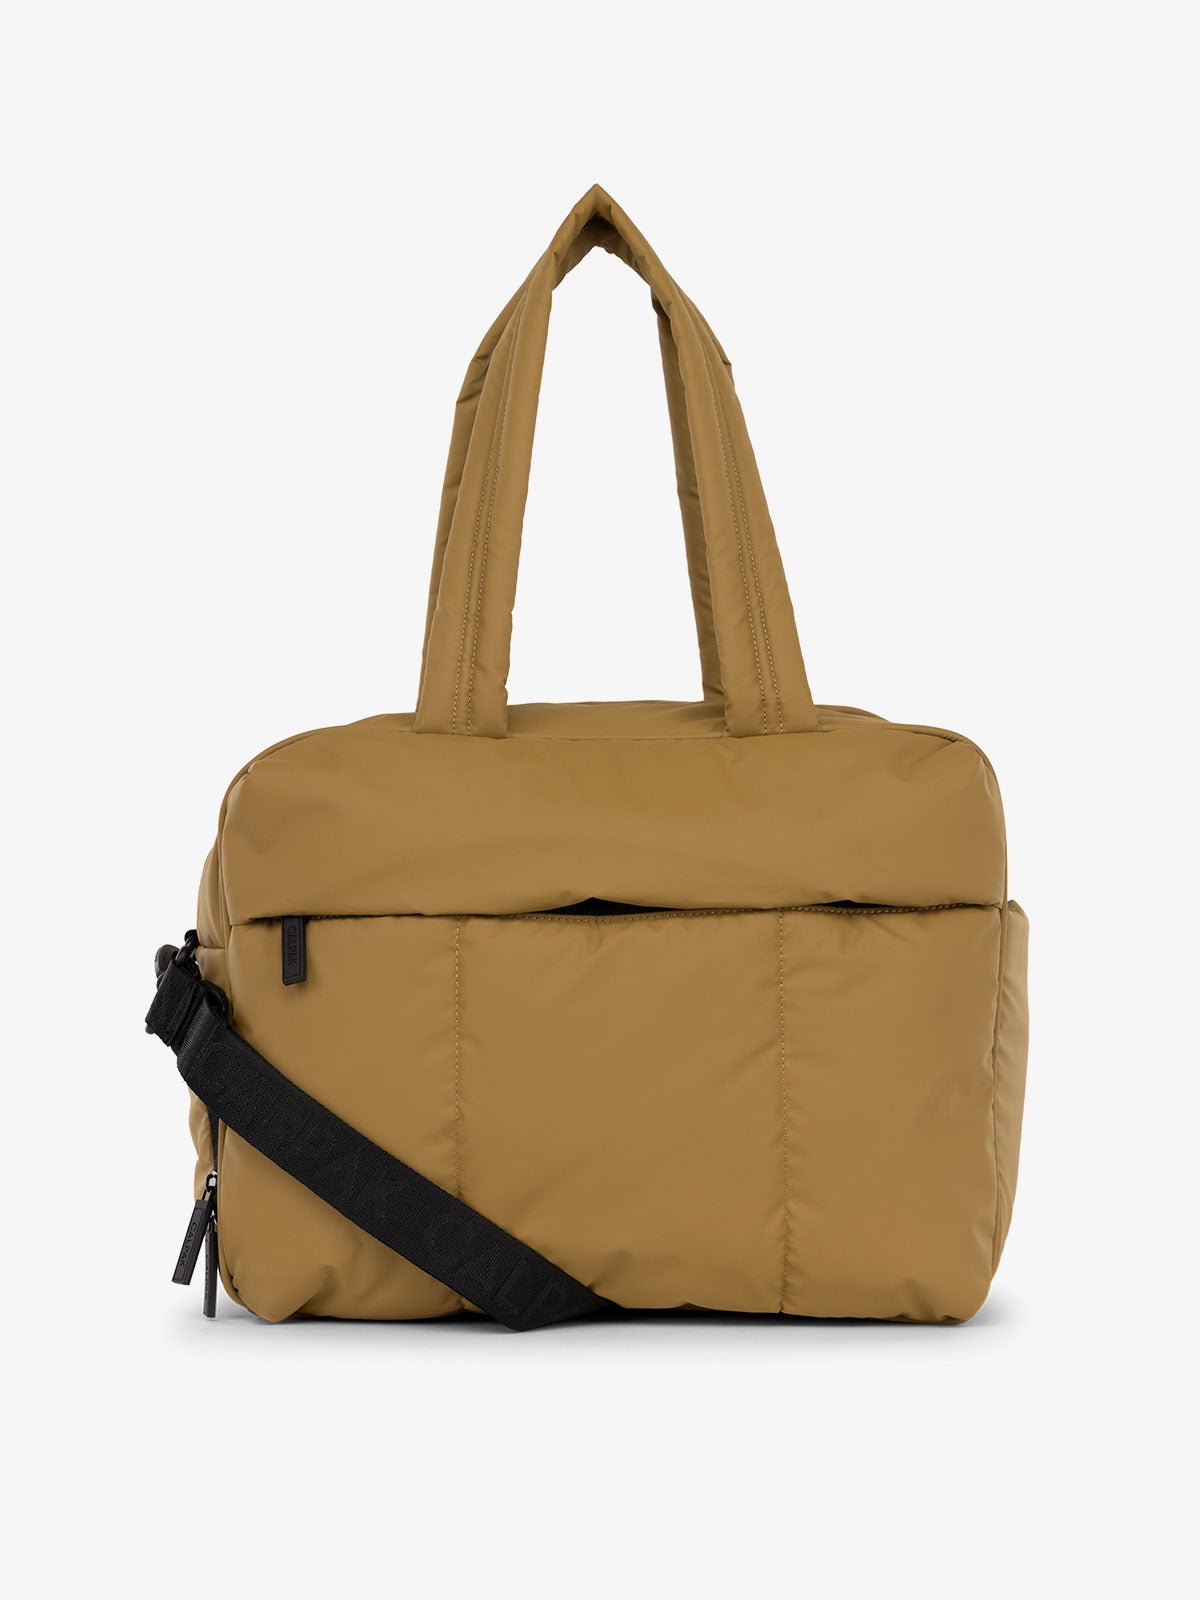 CALPAK Luka Duffel puffy Bag with detachable strap and zippered front pocket in khaki